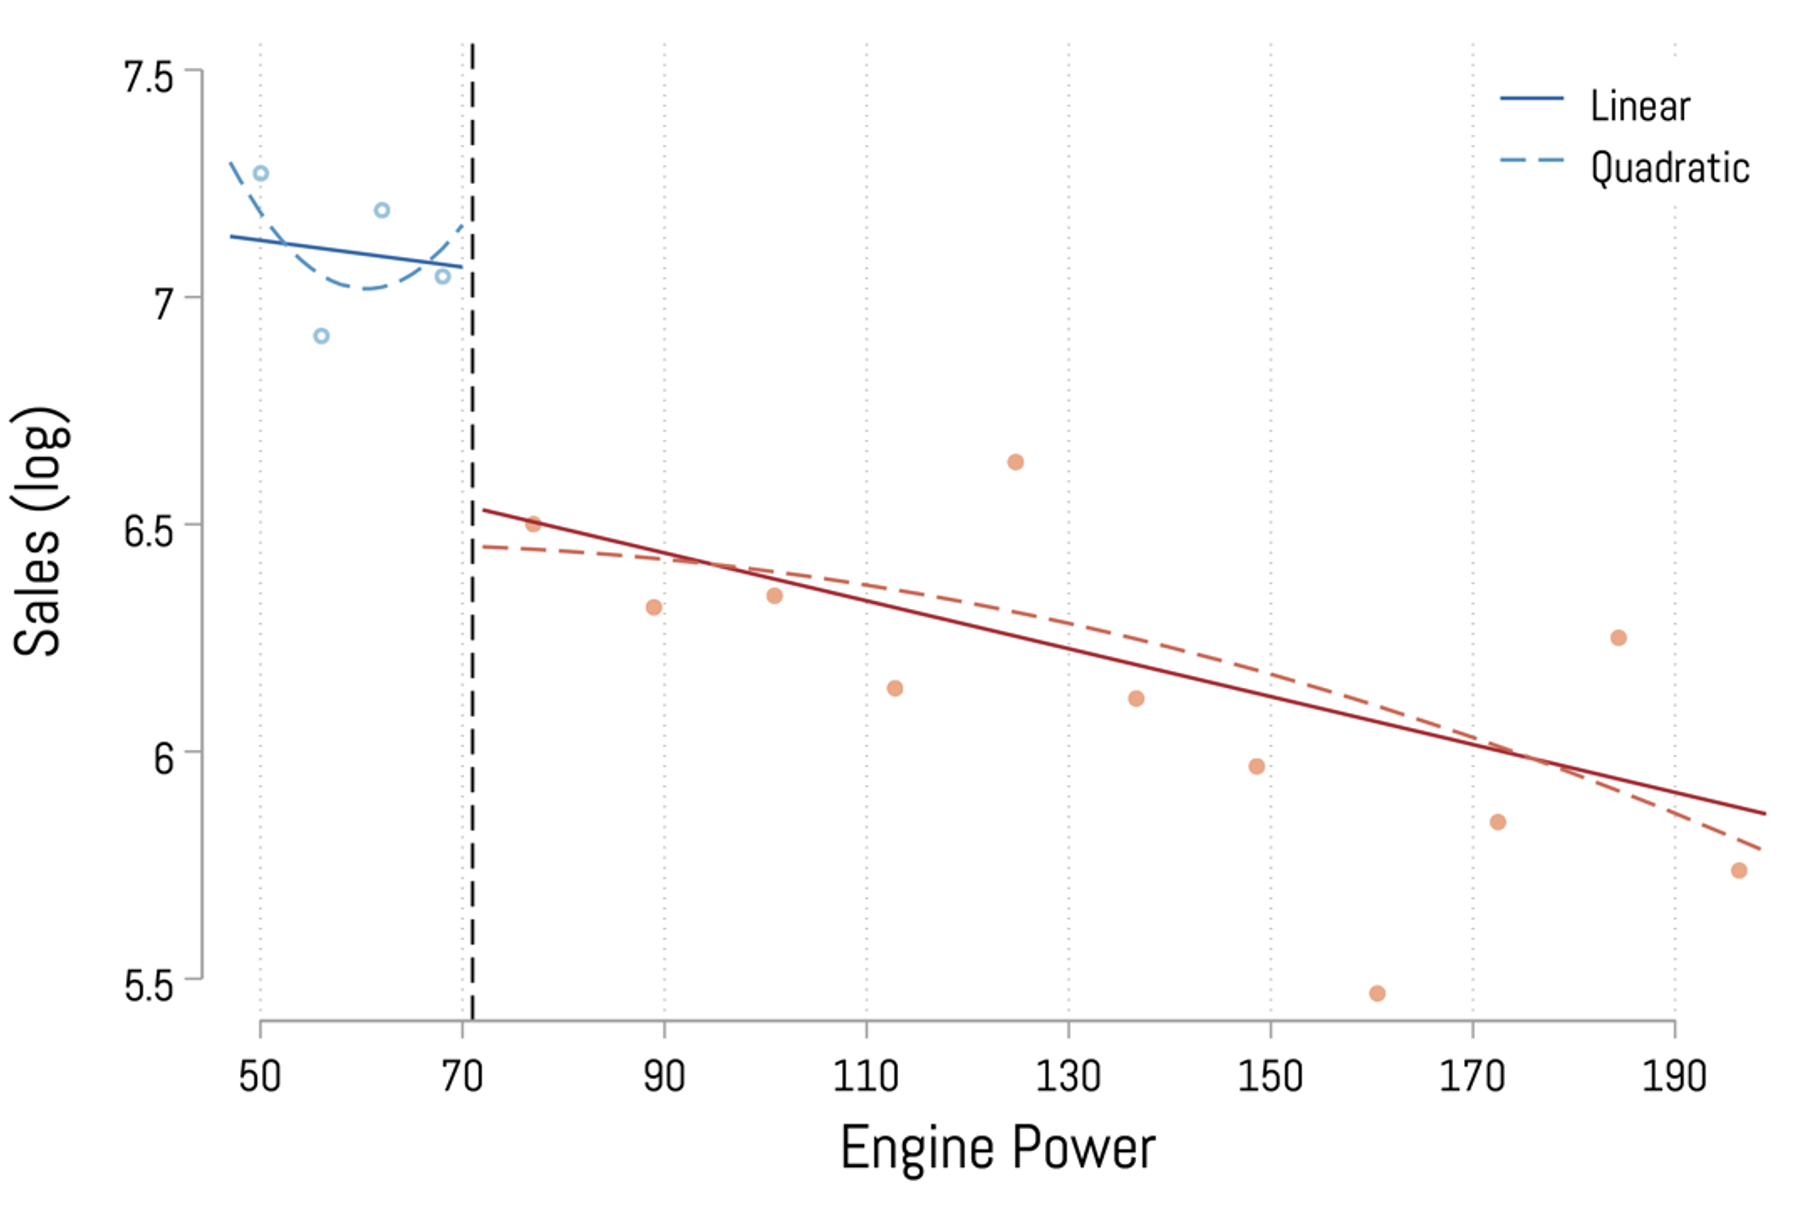 Figure 2 The effect of the power limit on car sales